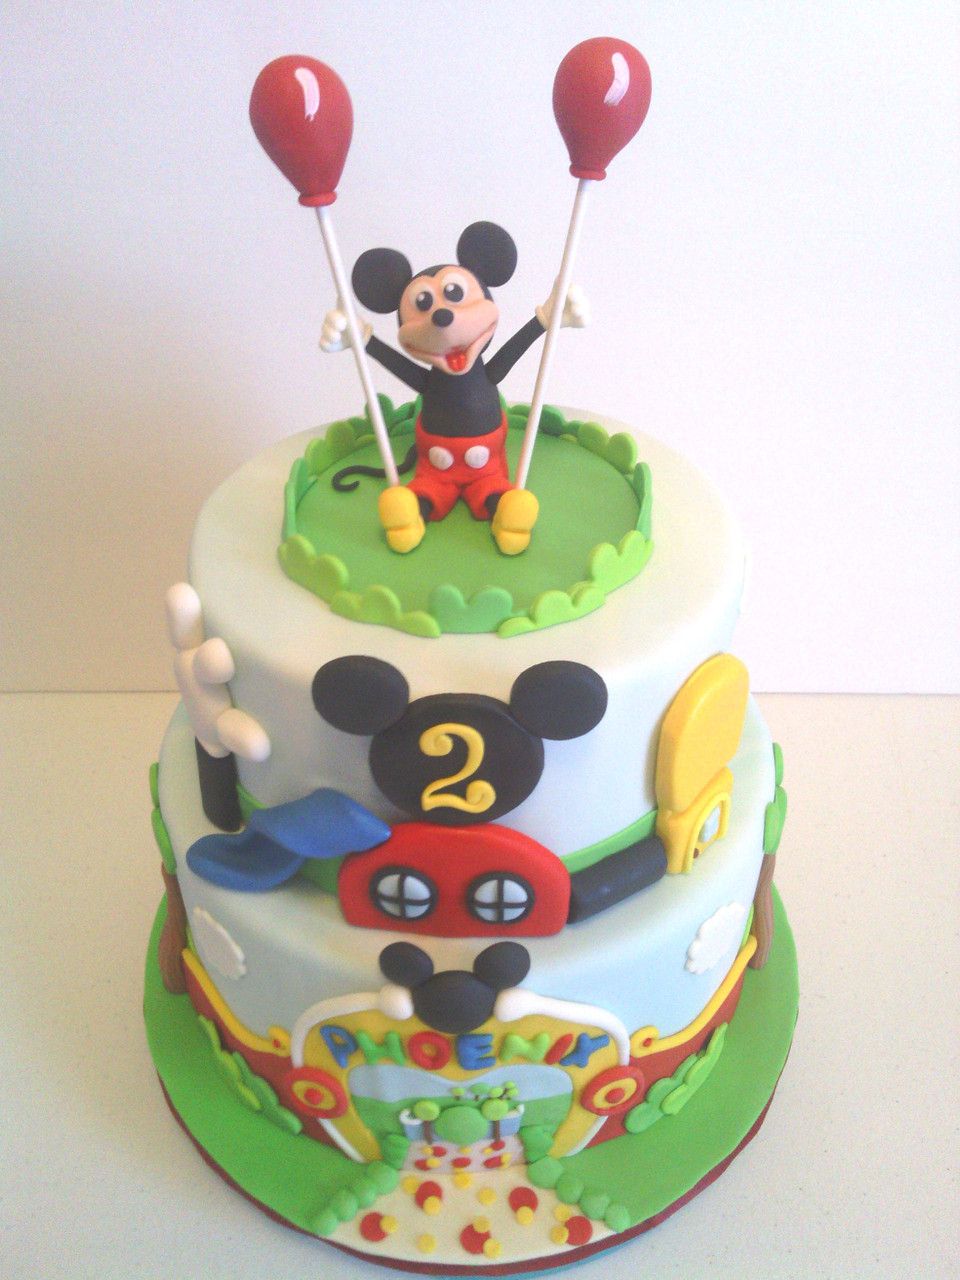 Mickey mouse club house cake with mickey cake topper and balloons.Kids ...